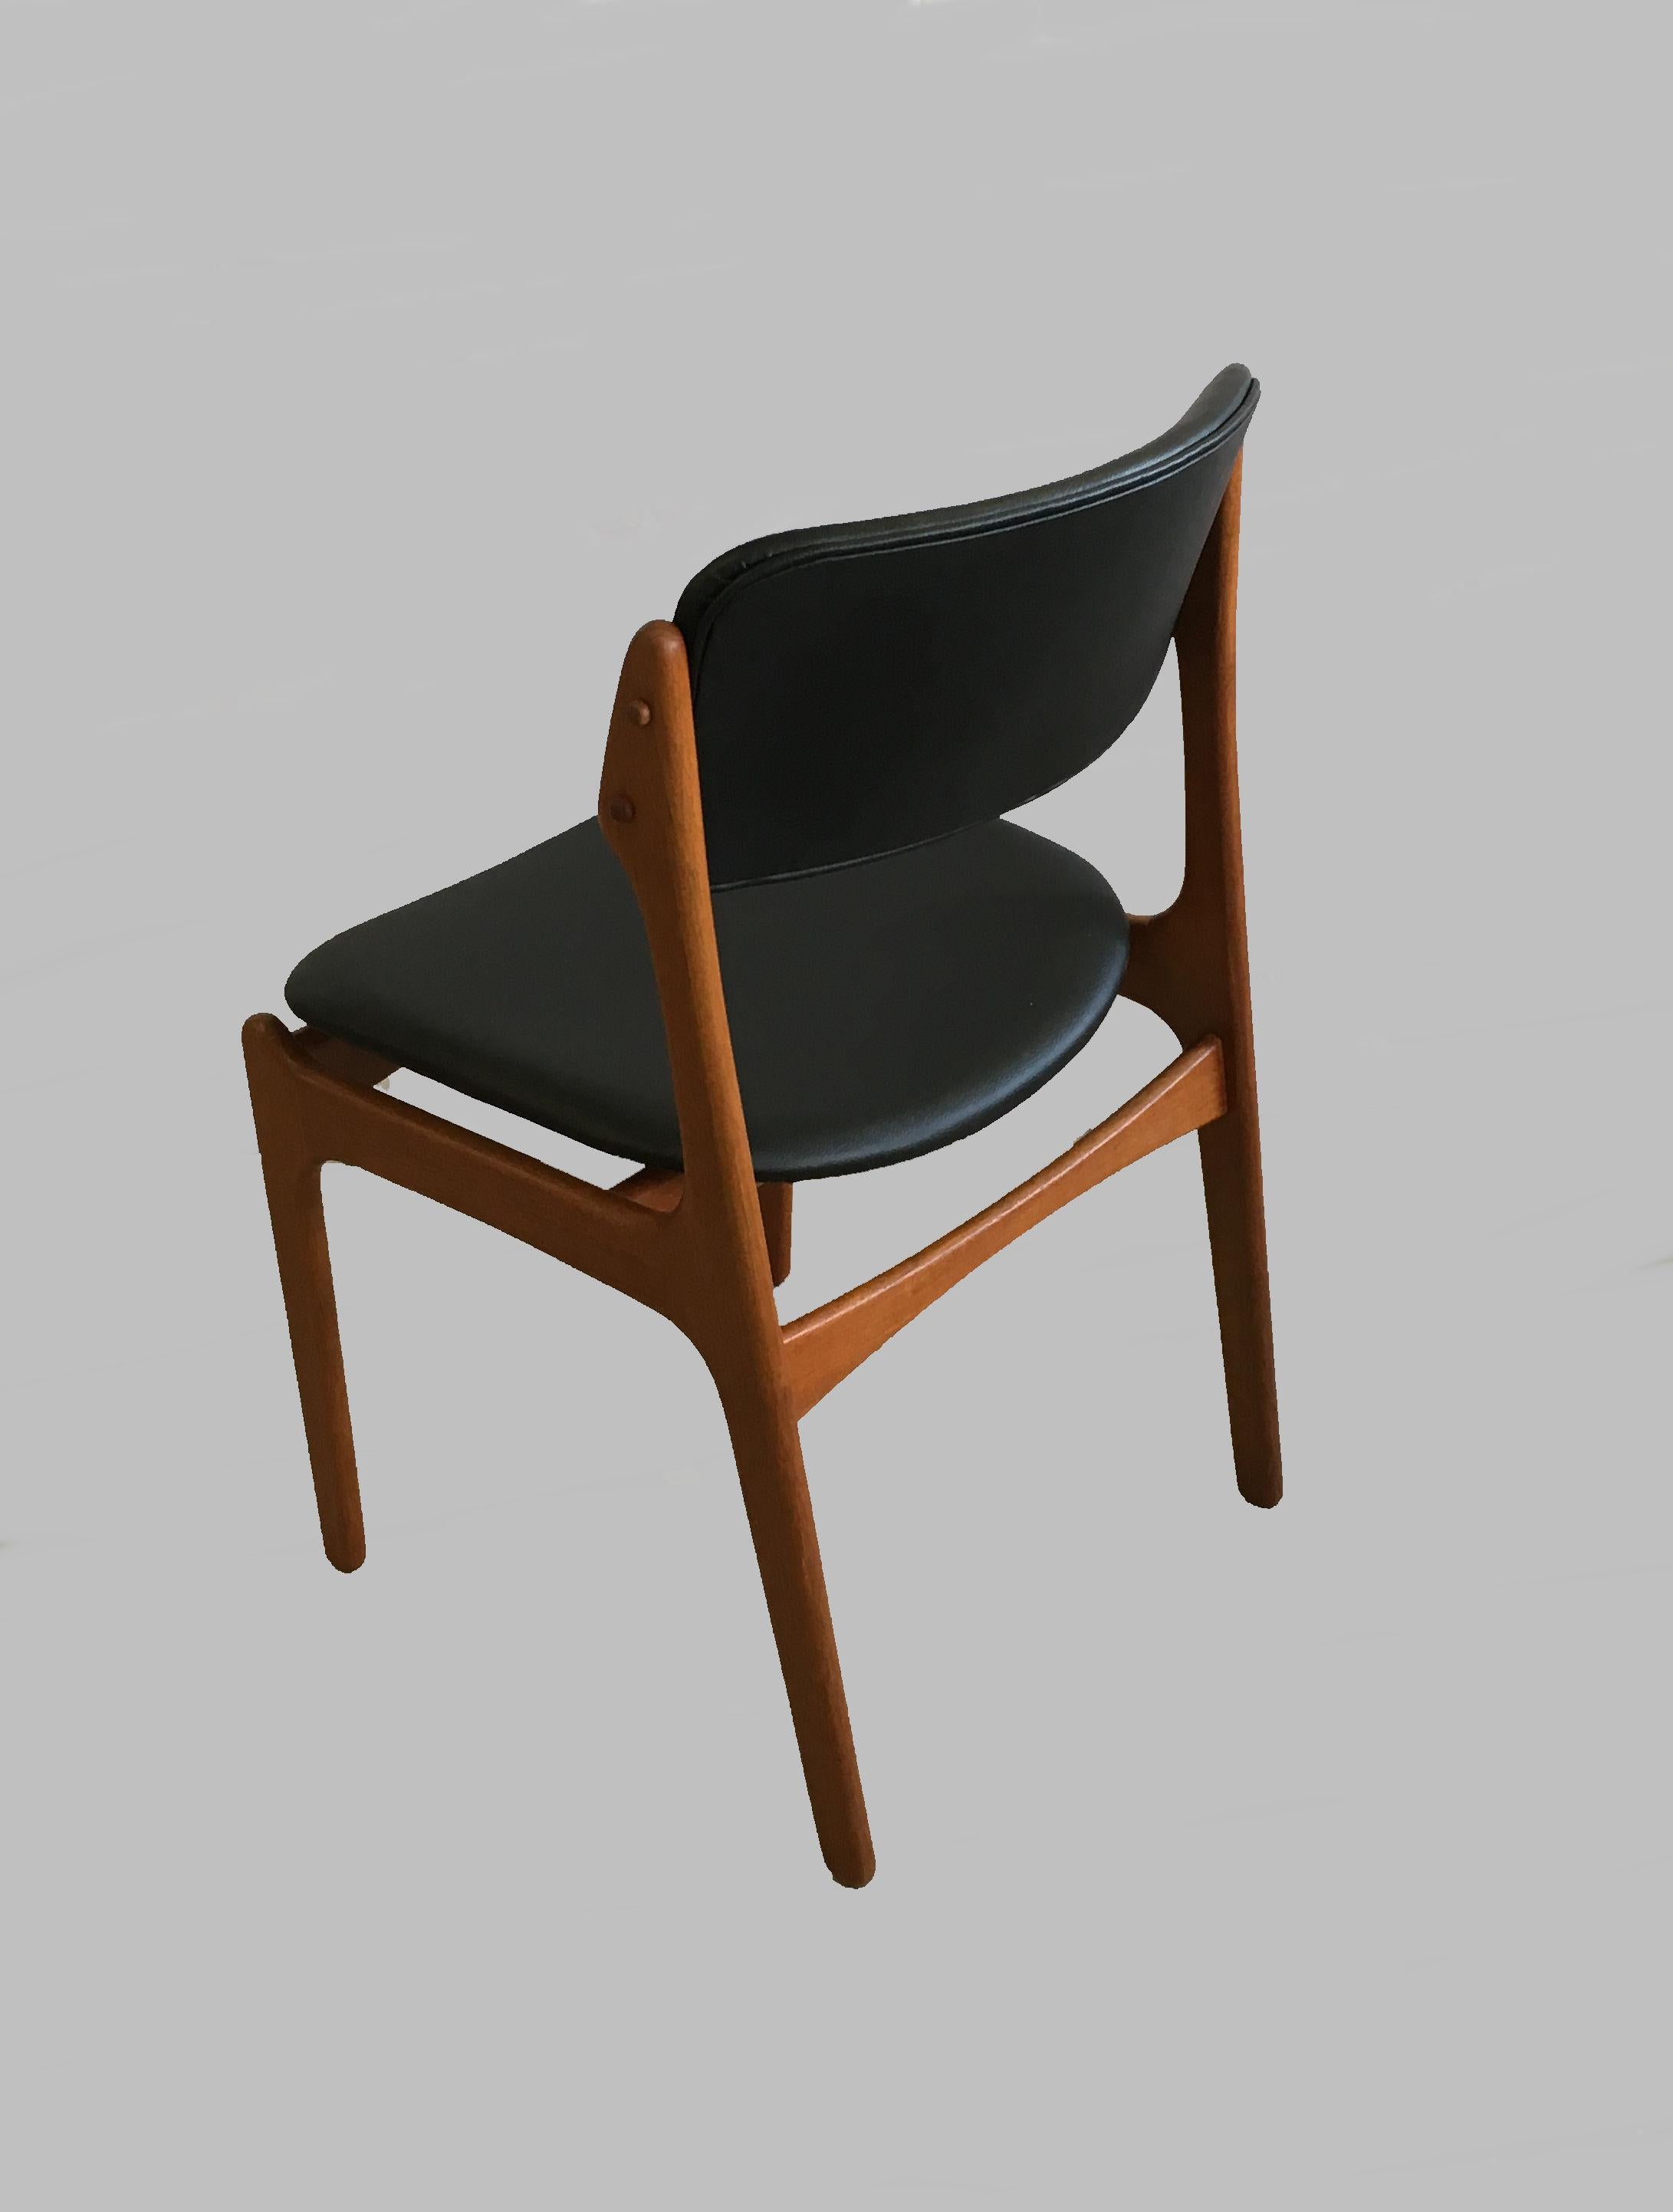 Four Fully Restored Erik Buch Teak Dining Chairs, Reupholstered in Black Leather 1